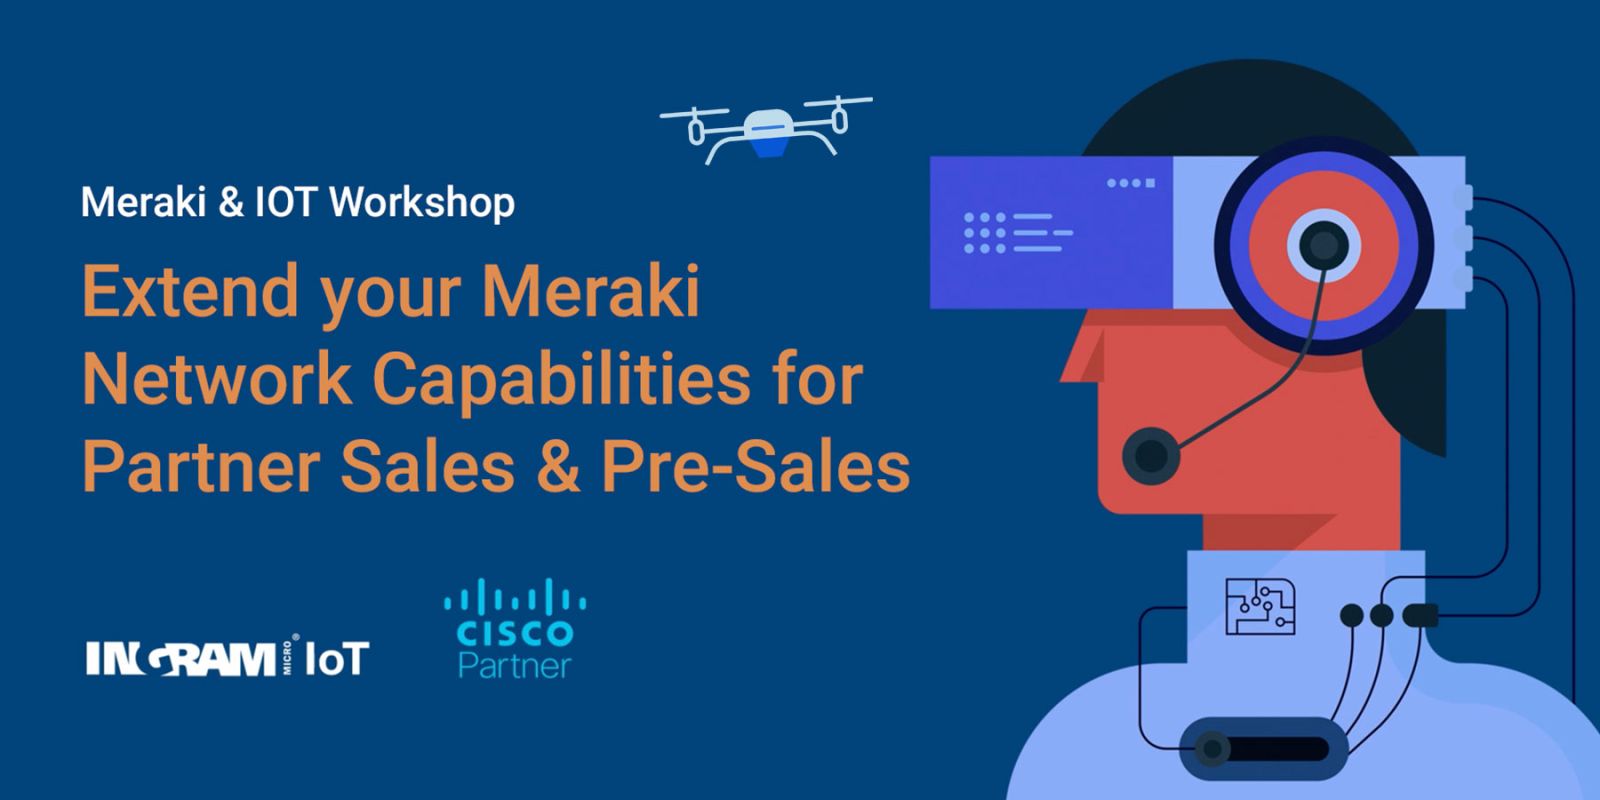 ON DEMAND - Extend your Meraki Network Capabilities for Partner Sales and Pre-Sales Featured Image